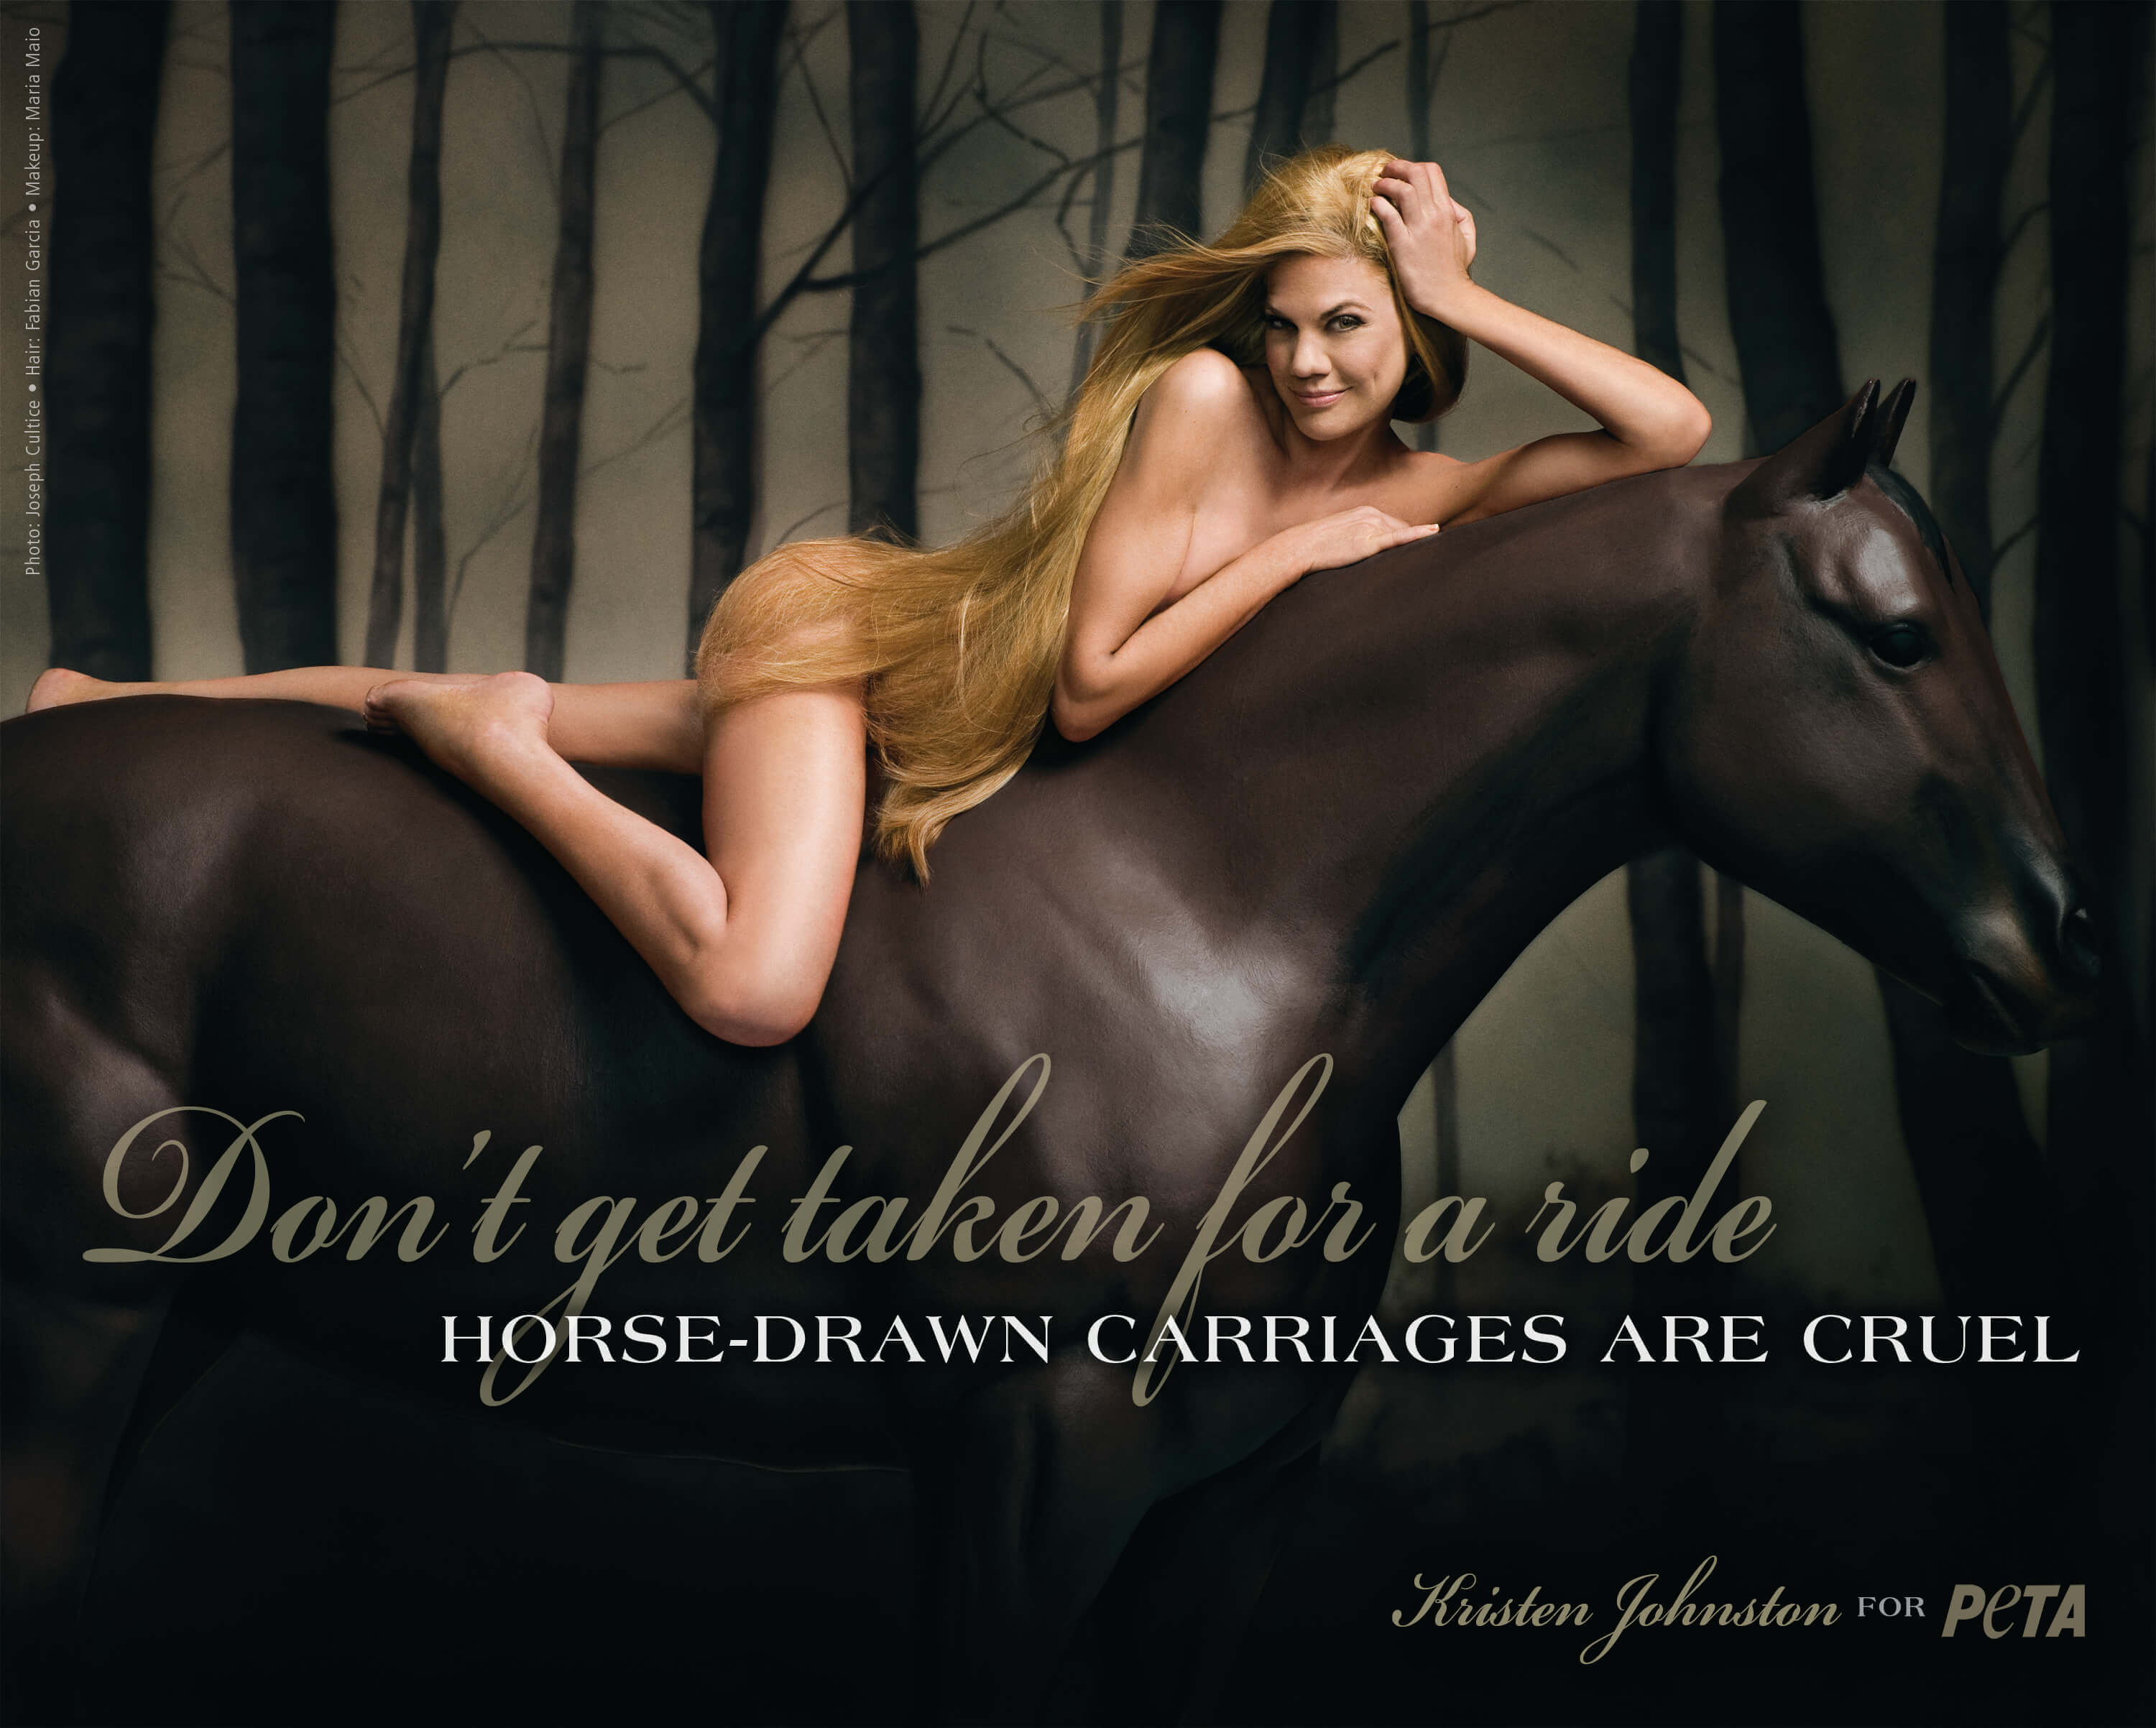 Friendly Nudes - Kristen Johnston Poses Nude in Ad Against Horse-Drawn ...